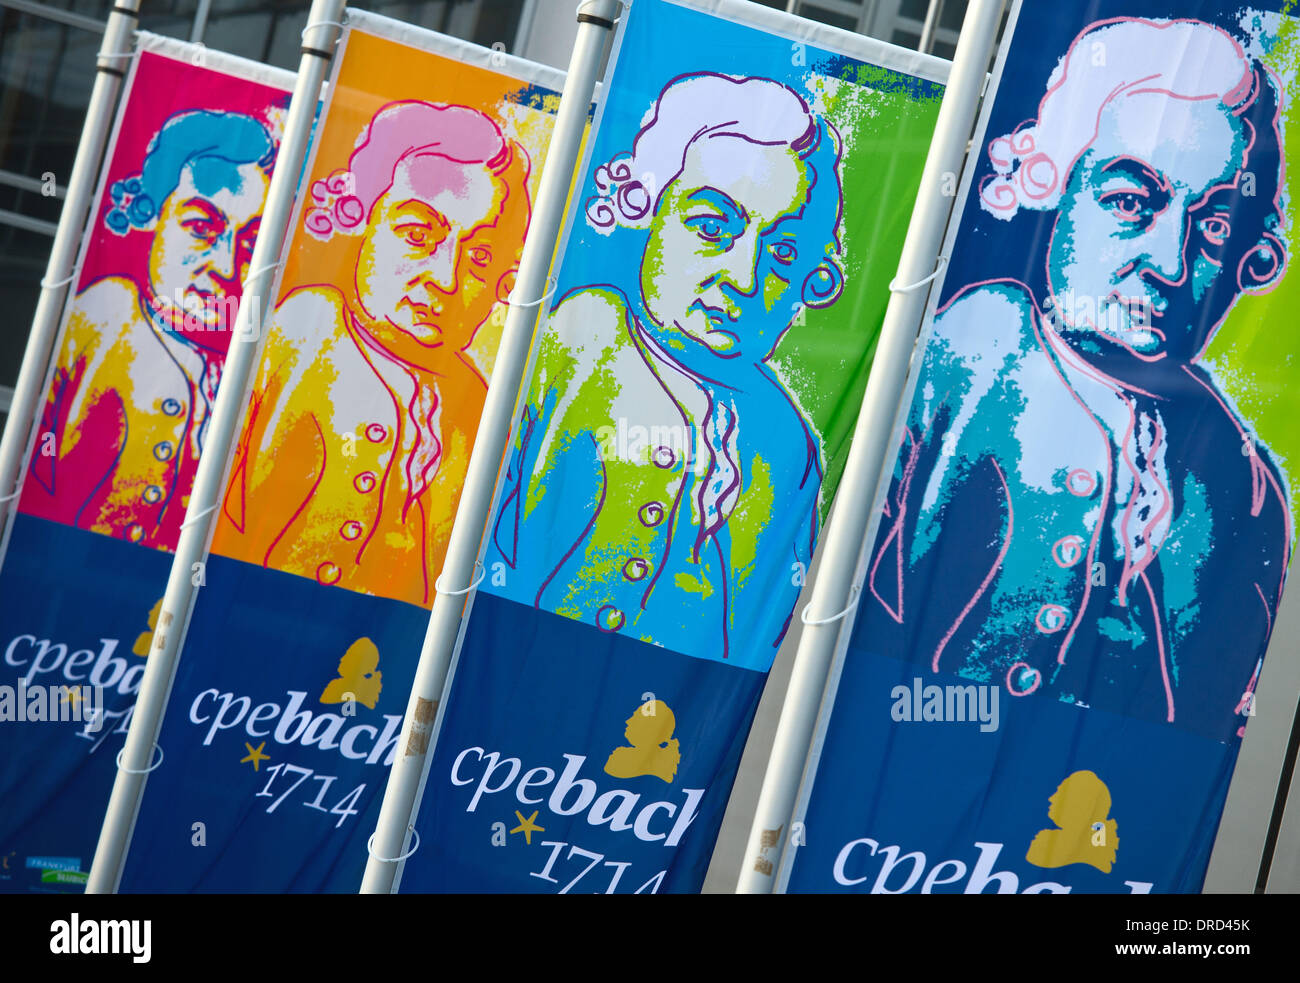 Banners with the portrait of composer Carl Philipp Emanuel Bach for Bach Year wave outside of Viadrina European University in Frankfurt Oder, Germany, 23 January 2014. The 300th birthday of Carl Philipp Emanuel Bach will be celebrated by the university and the city in 2014. He didn't just have a musical affect on the city. Since 1734 he also studied law at the old Frankfurt University. Photo: PATRICK PLEUL Stock Photo